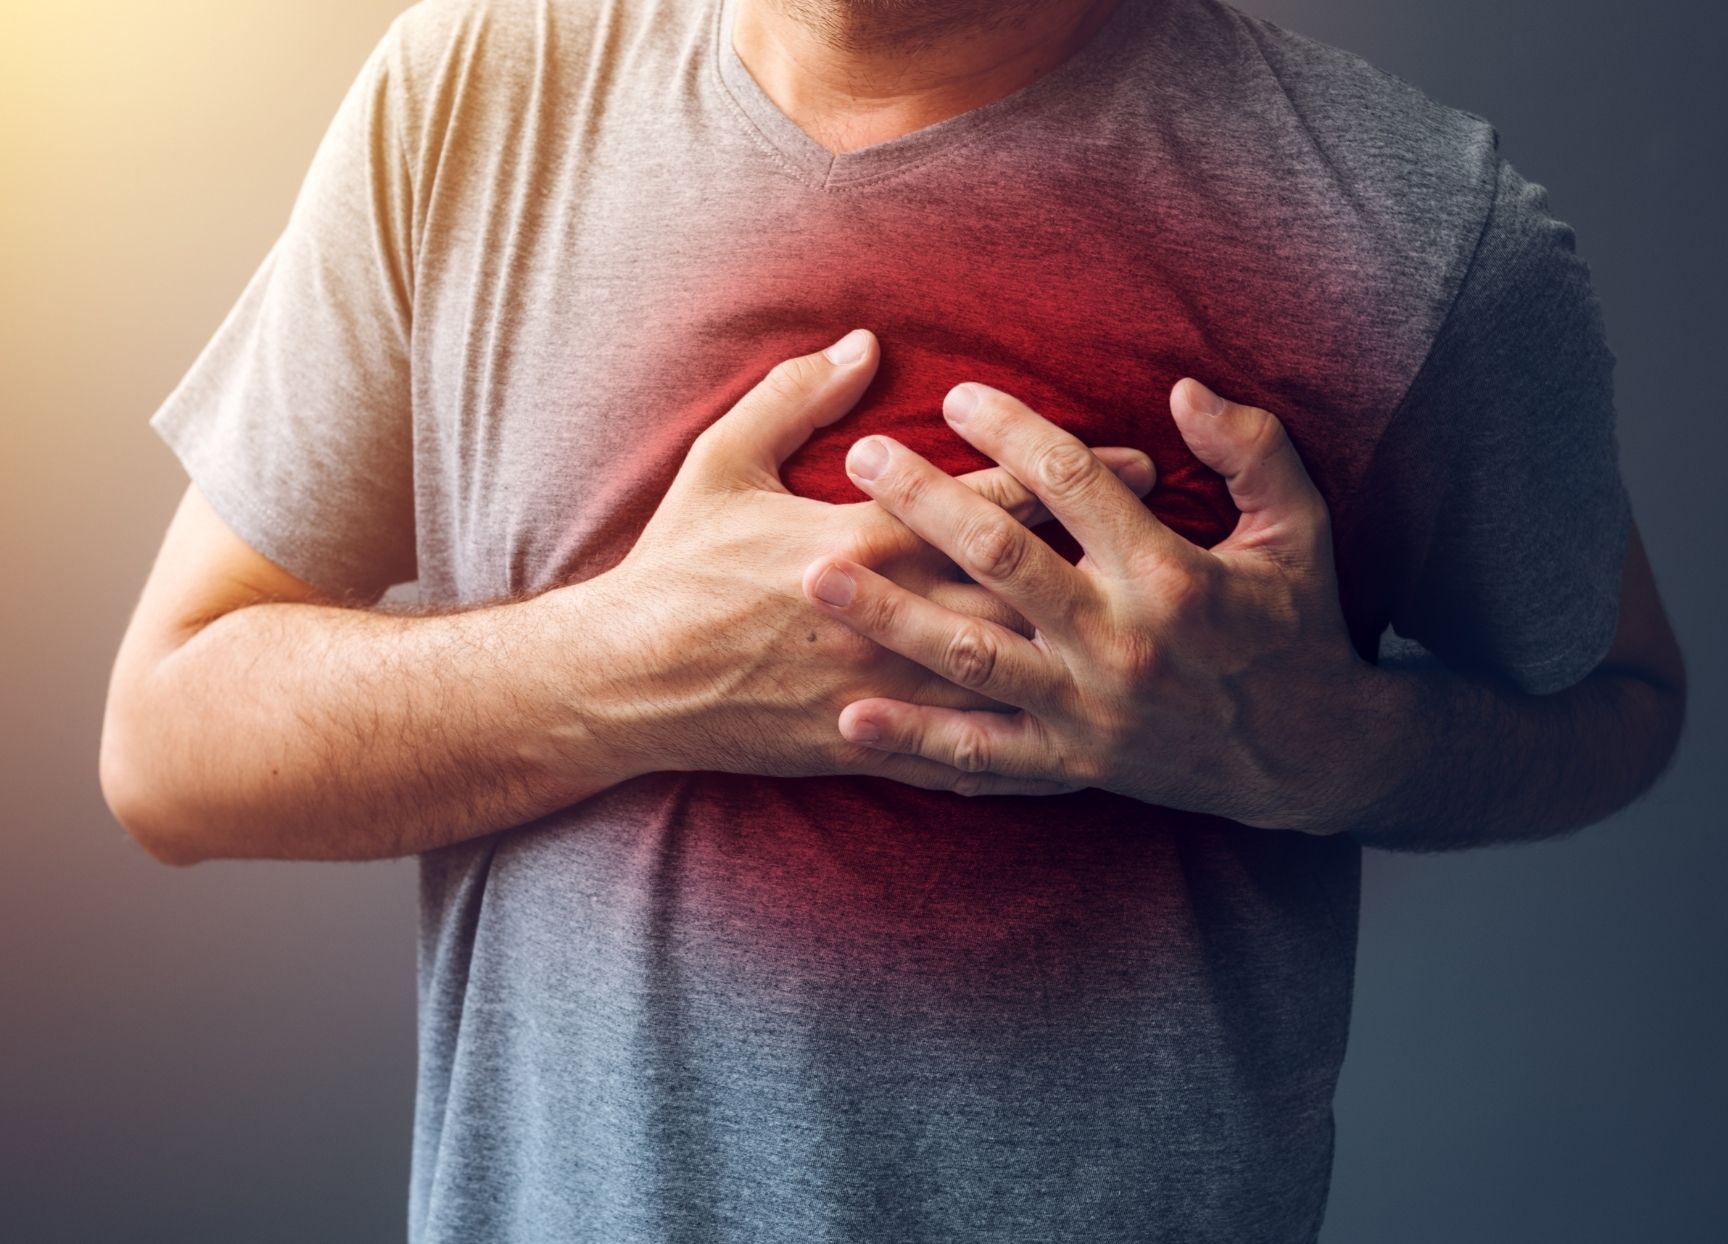 Can You Develop Angina in Your 20s?